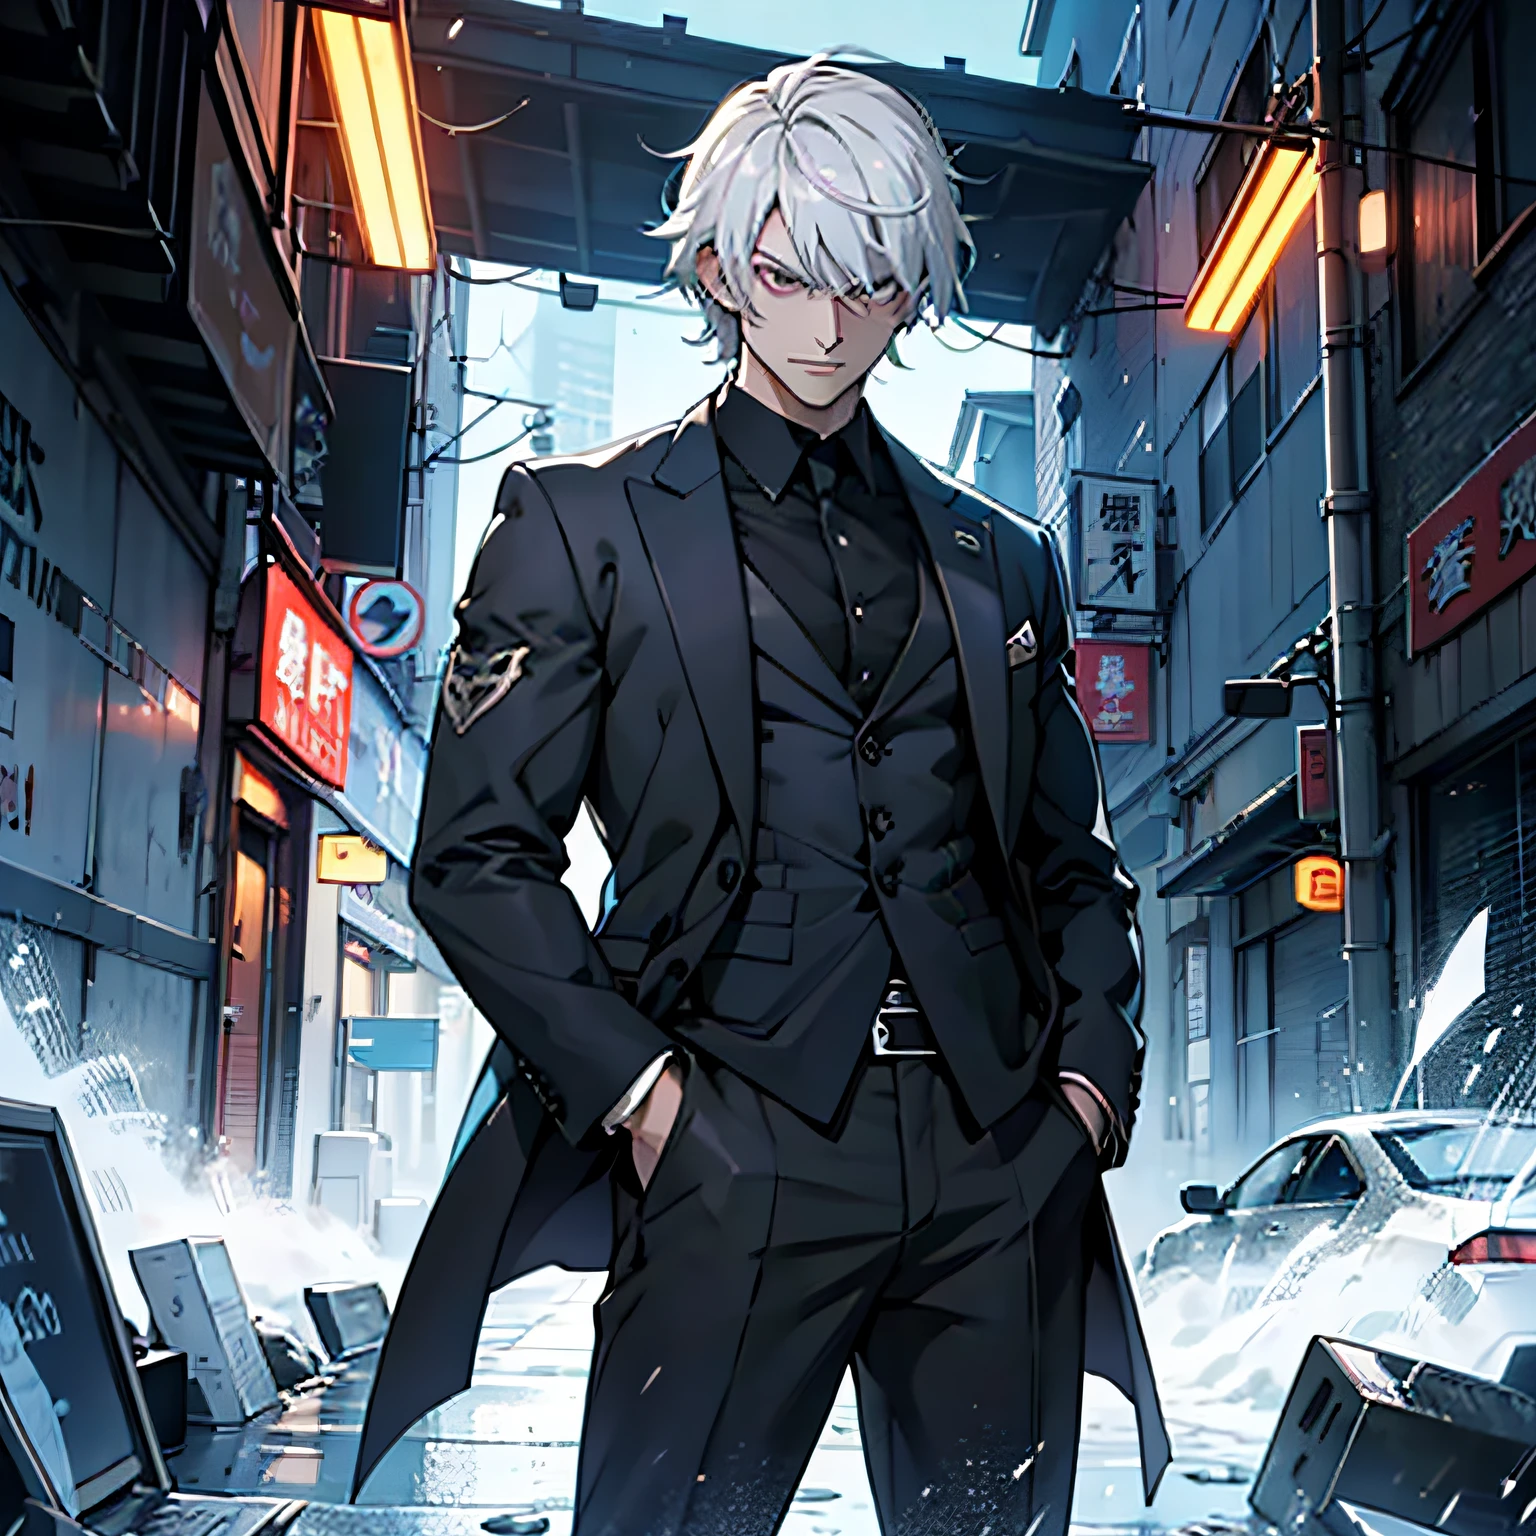 Tall, , blacksuit, Black-gray pupils, Handsome, Silvery-white skin, Serious expression, Cold, Invincible, Silver-white hair, quadratic element, Silver hair, Parted bangs, Anime style, Cinematic lighting, Masterpiece, Best quality，ssmile，standing on your feet，Put your hands in your pockets，The strongest combat effectiveness，Have a sense of humor ，male people，cool guy，frontage,Grows tall,Honkai,Armageddon